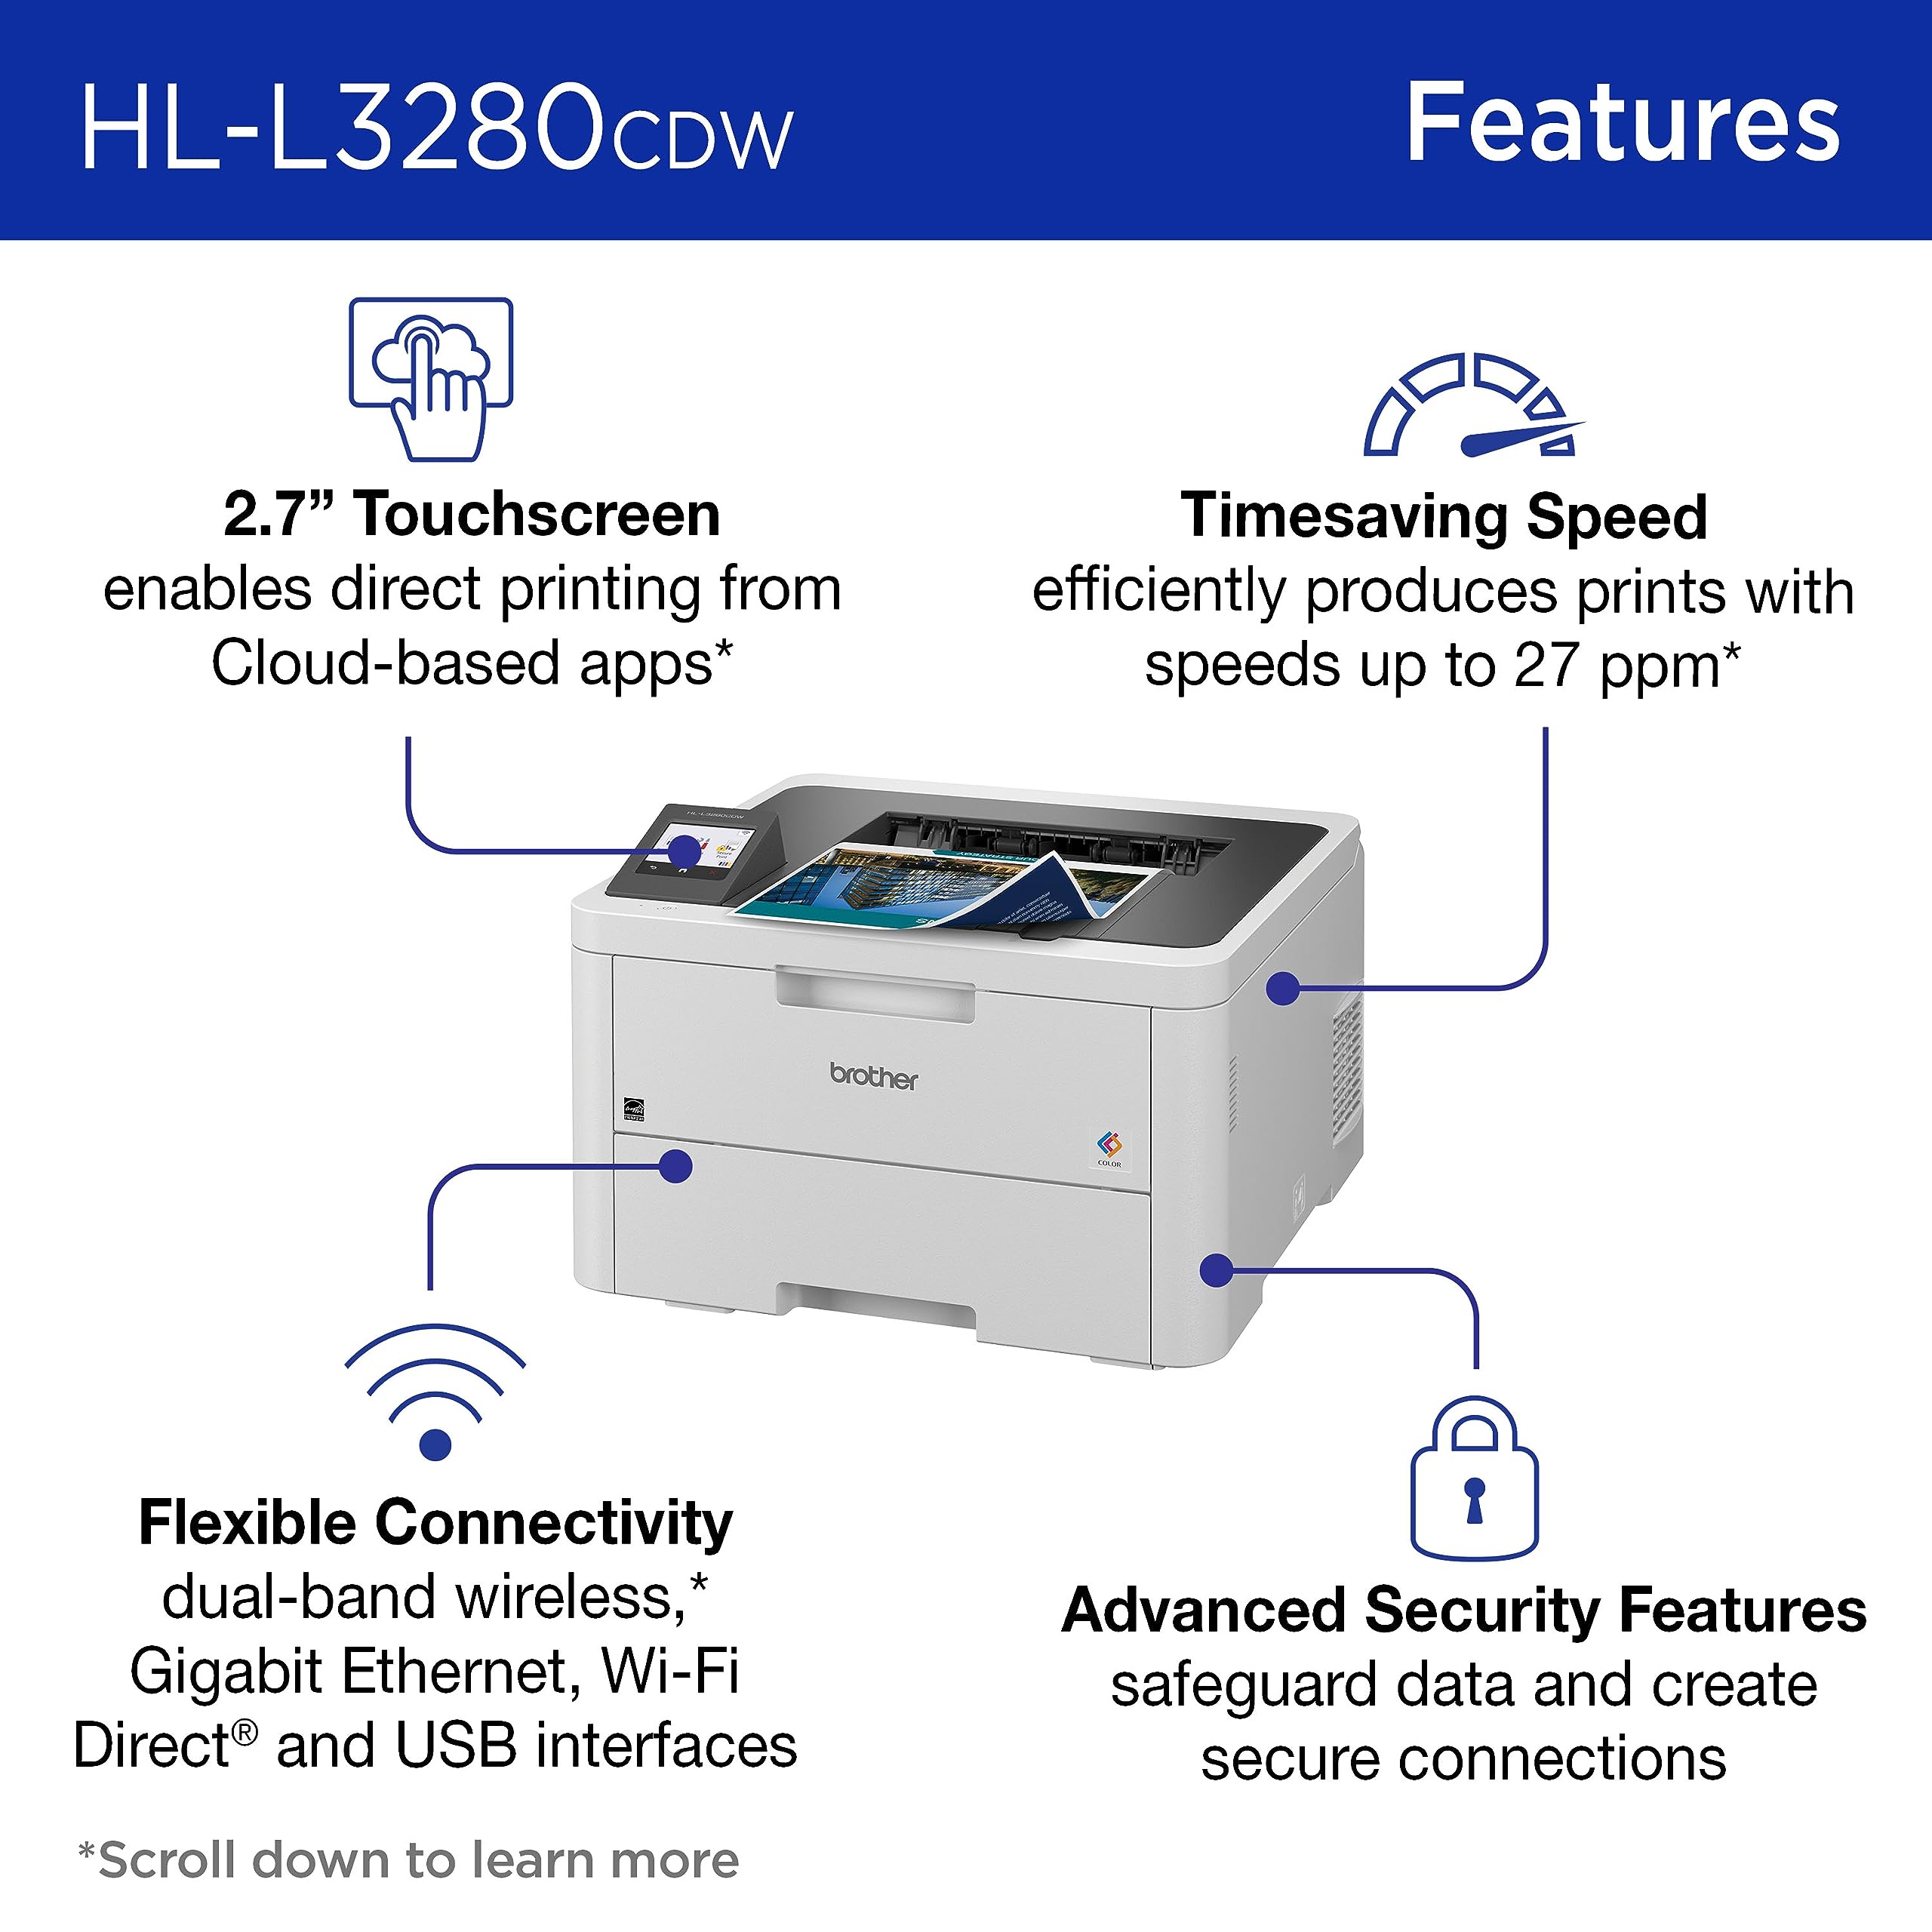 Brother HL-L3280CDW Wireless Compact Digital Color Printer with Laser Quality Output, Duplex, Mobile Printing & Ethernet | Includes 4 Month Refresh Subscription Trial¹, Amazon Dash Replenishment Ready